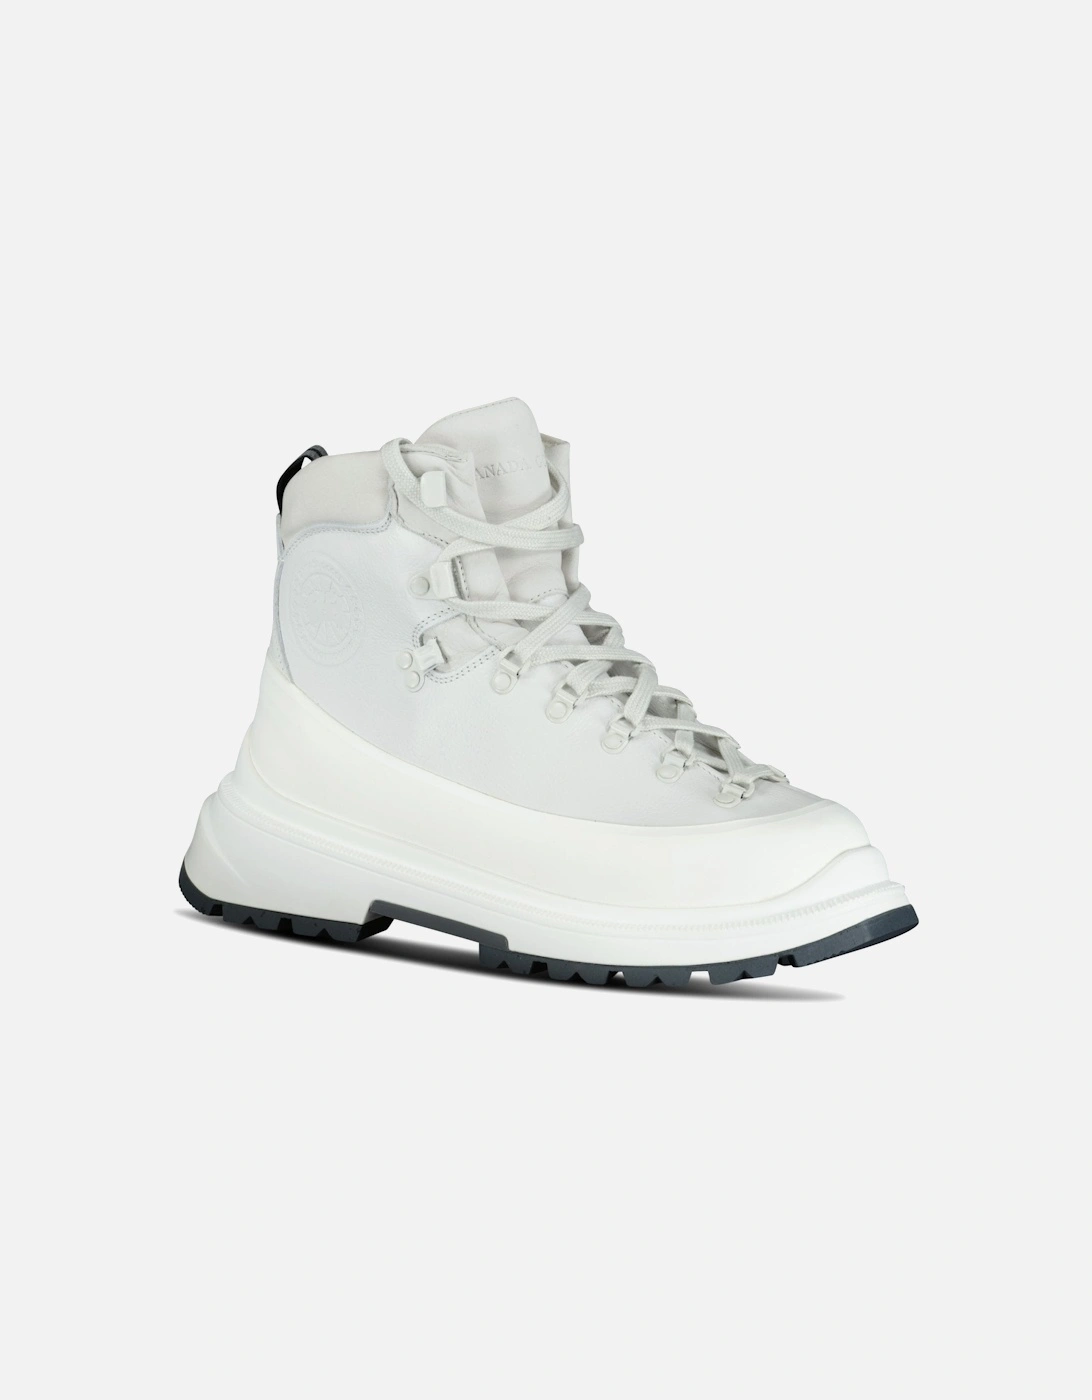 'Journey' Boots White